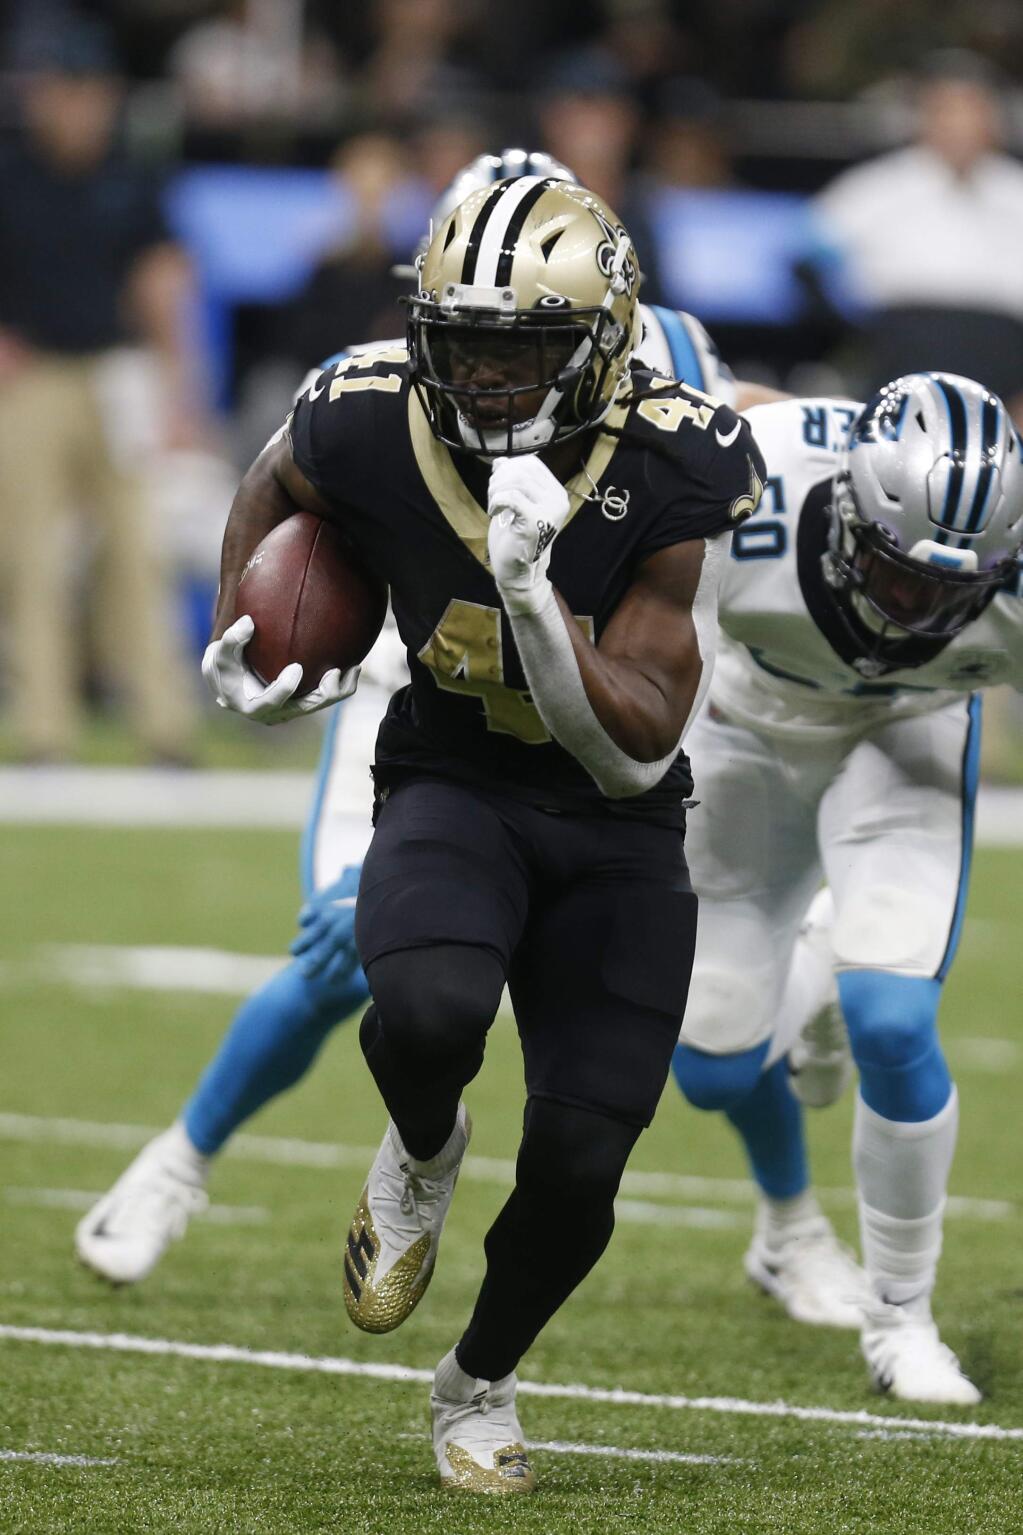 New Orleans Saints running back Alvin Kamara (41) runs the football, during the second half at an NFL football game against the Carolina Panthers, Sunday, Nov. 24, 2019, in New Orleans. (AP Photo/Butch Dill)